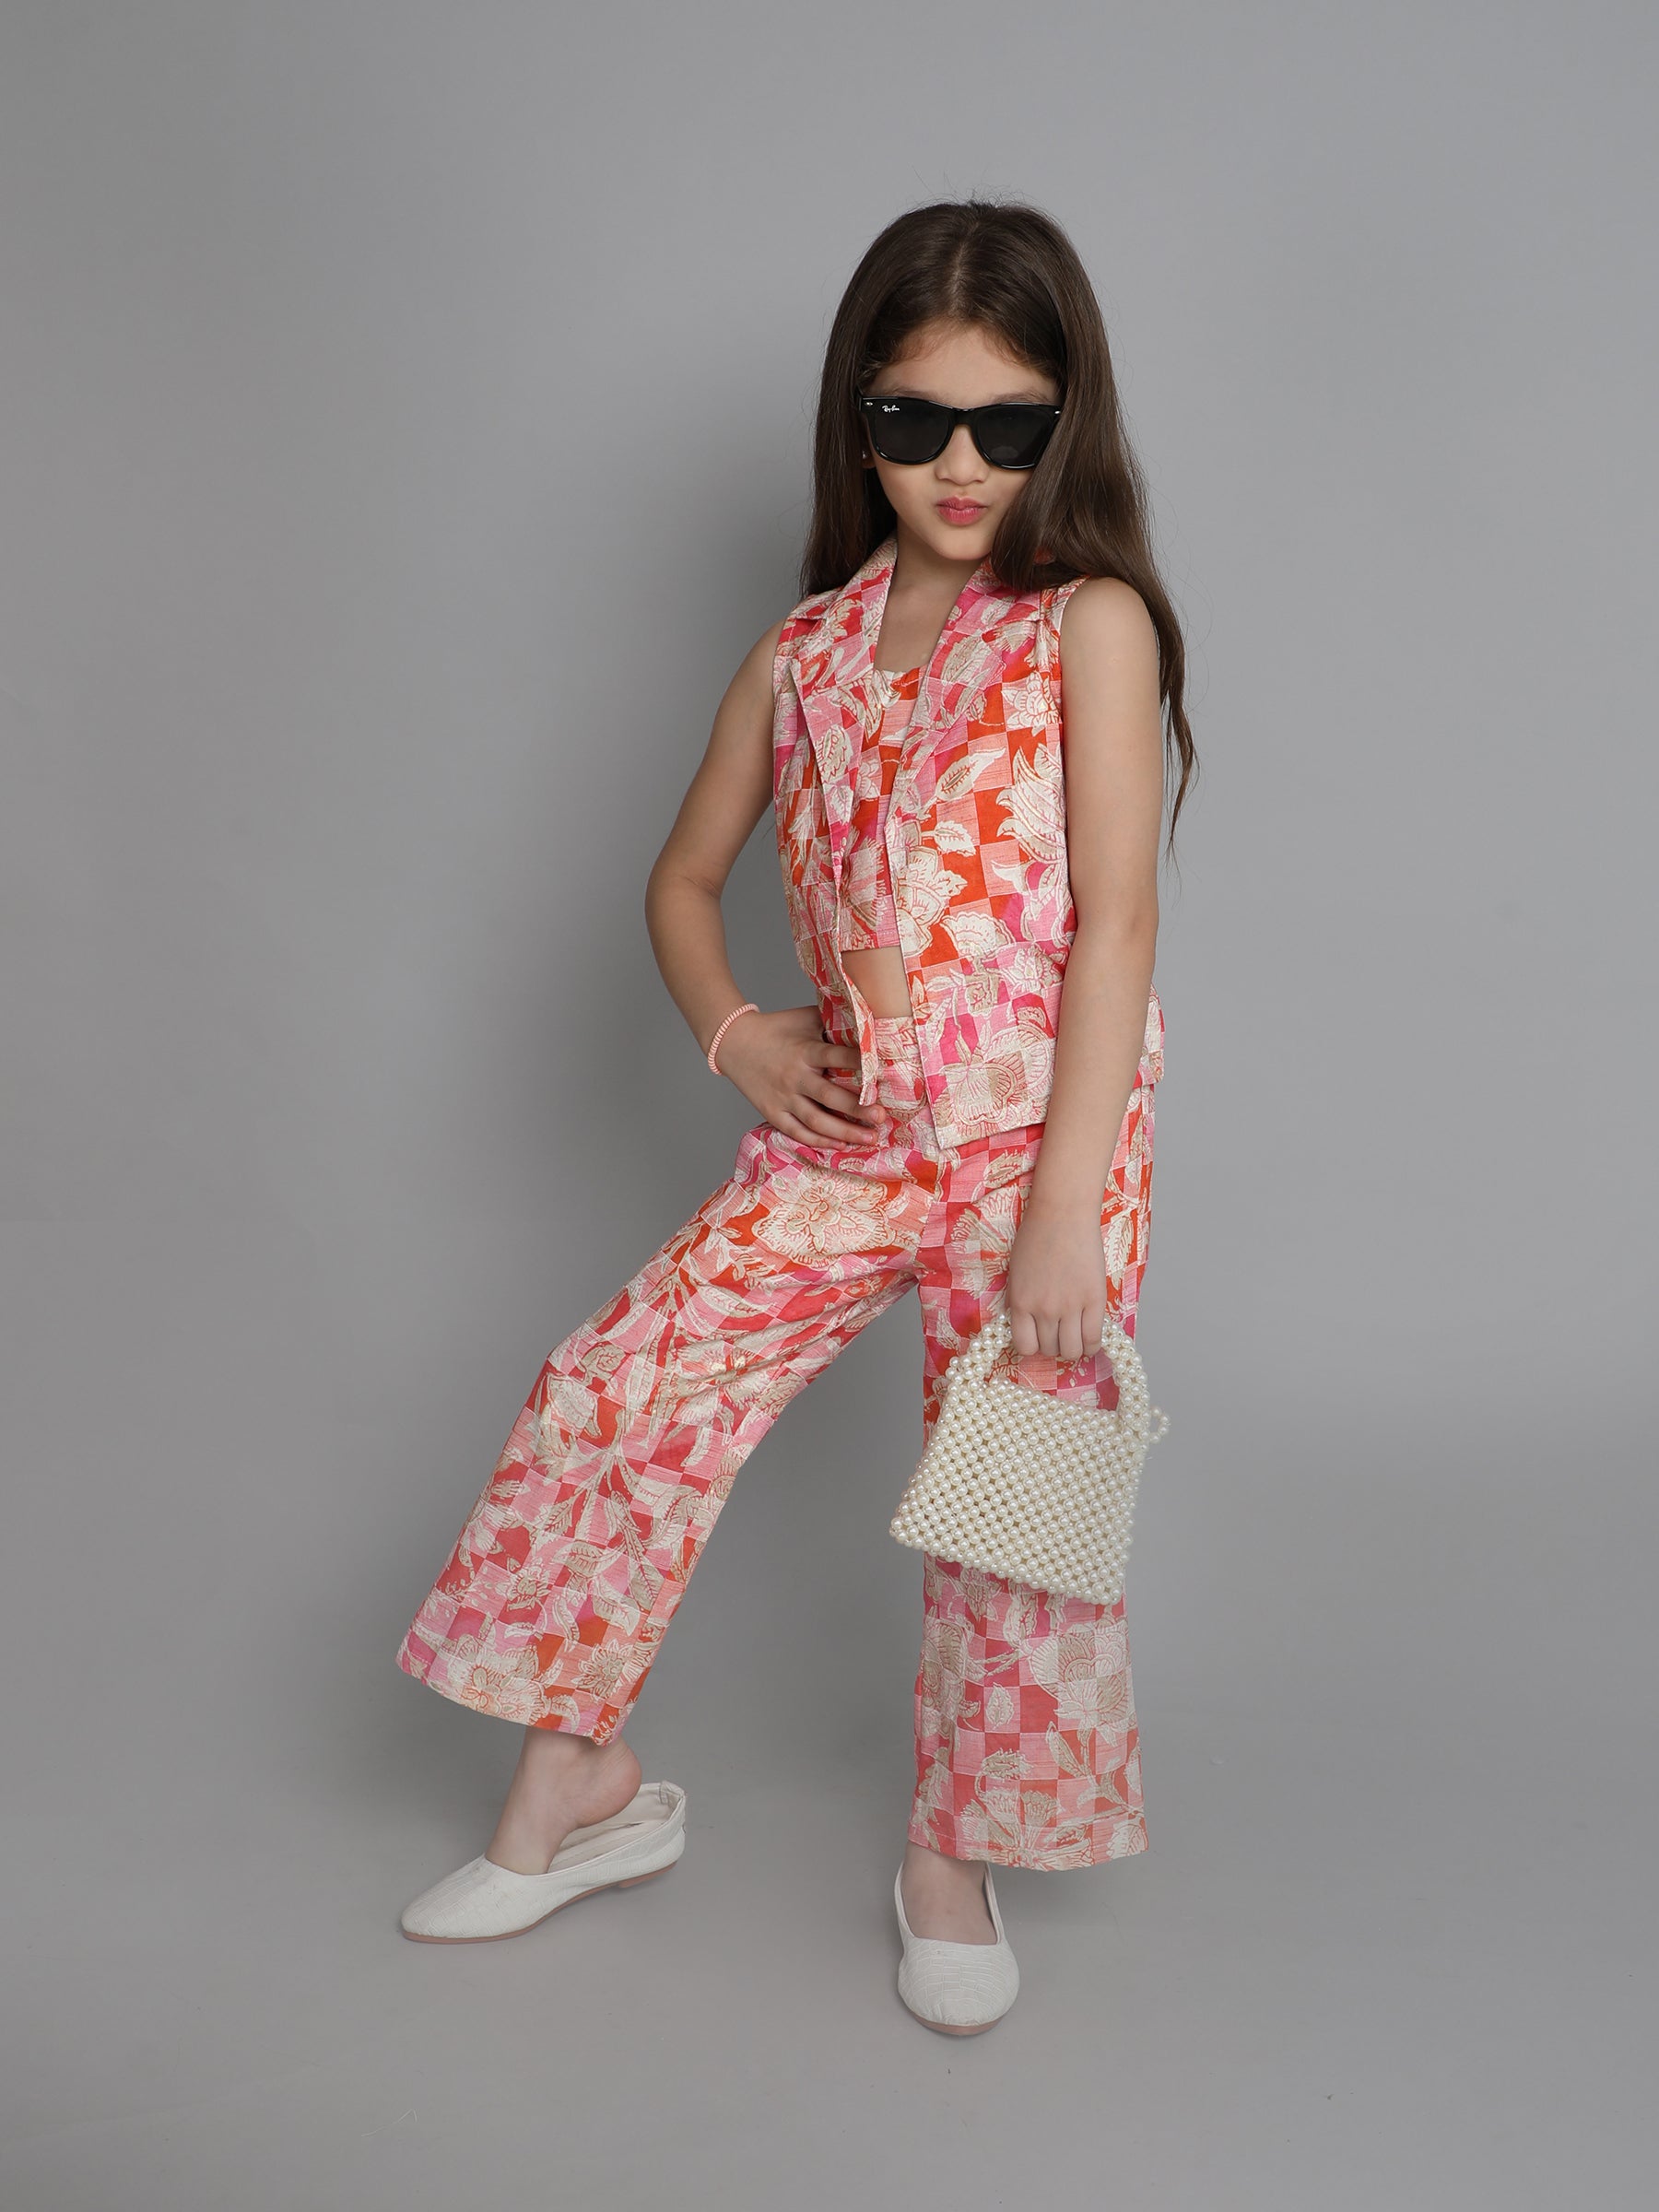 Taffykids dobby checks and floral printed Sleeveless jacket with matching pant and singlet crop top set-Multi